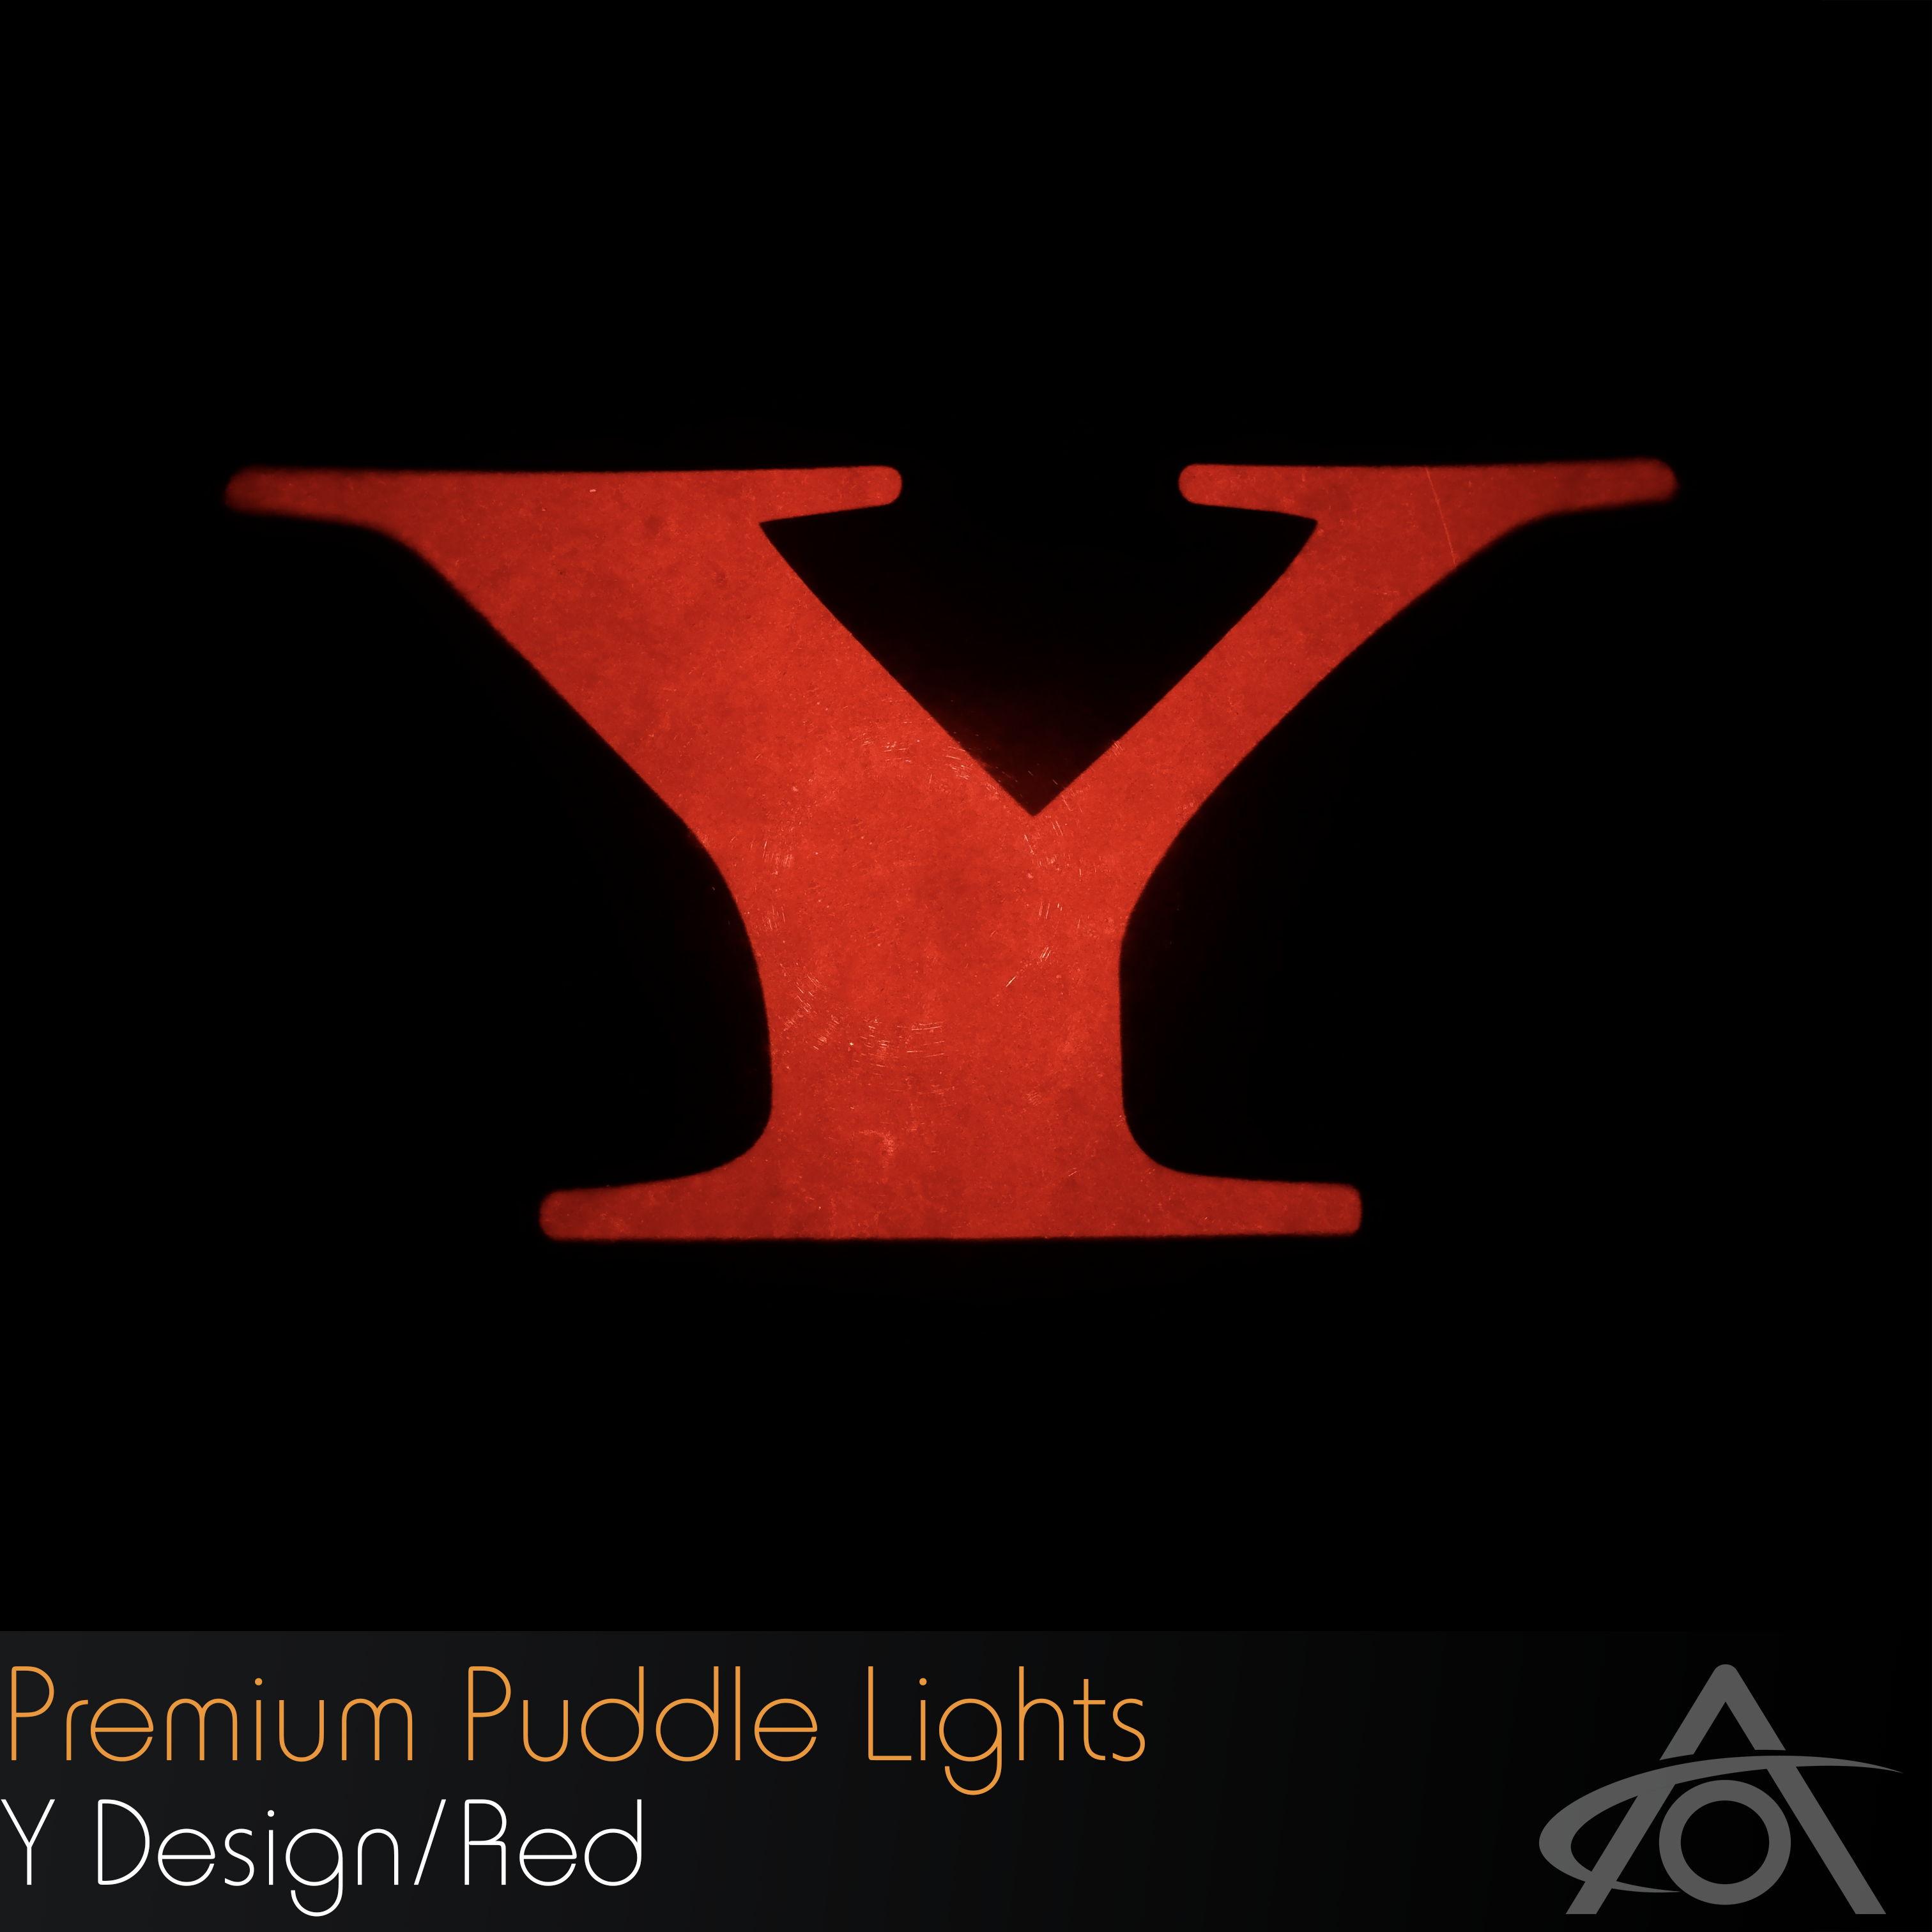 "Y" Ultra-Bright LED Premium Puddle Lights (red, pair)